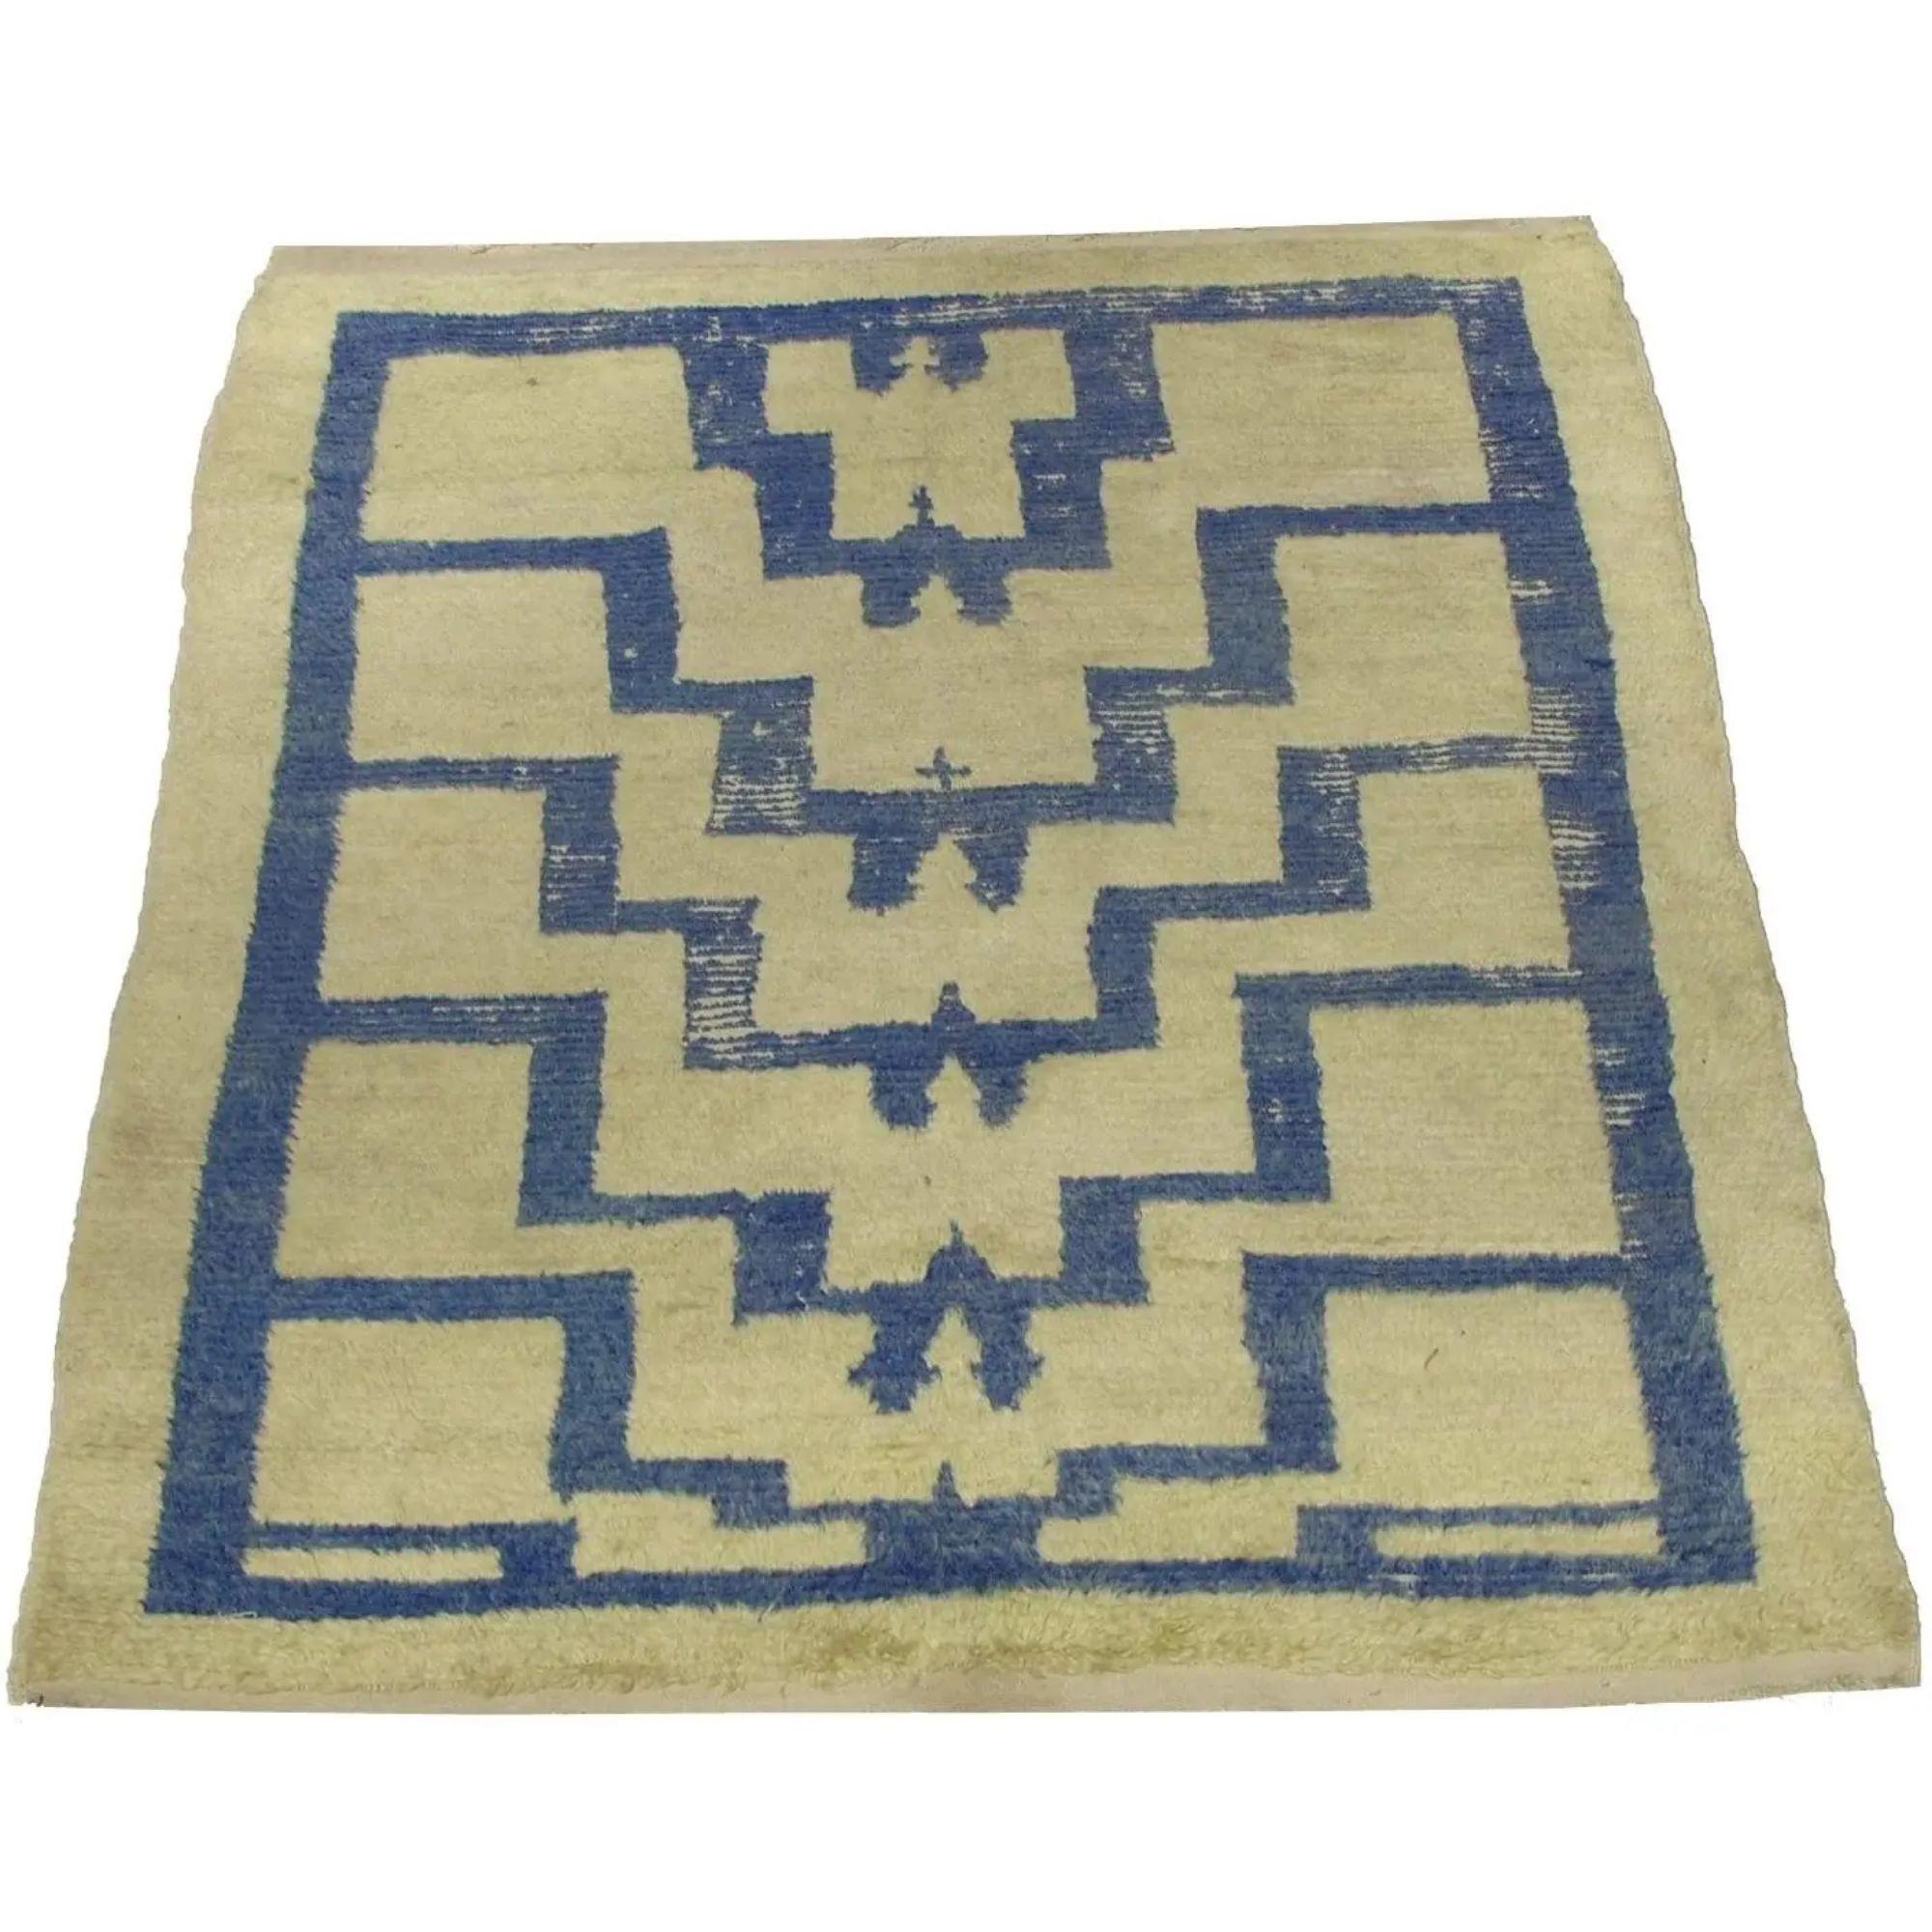 Early 20th Century 1900 Antique Modern Design Moroccan Rug - 4'3'' x 5'